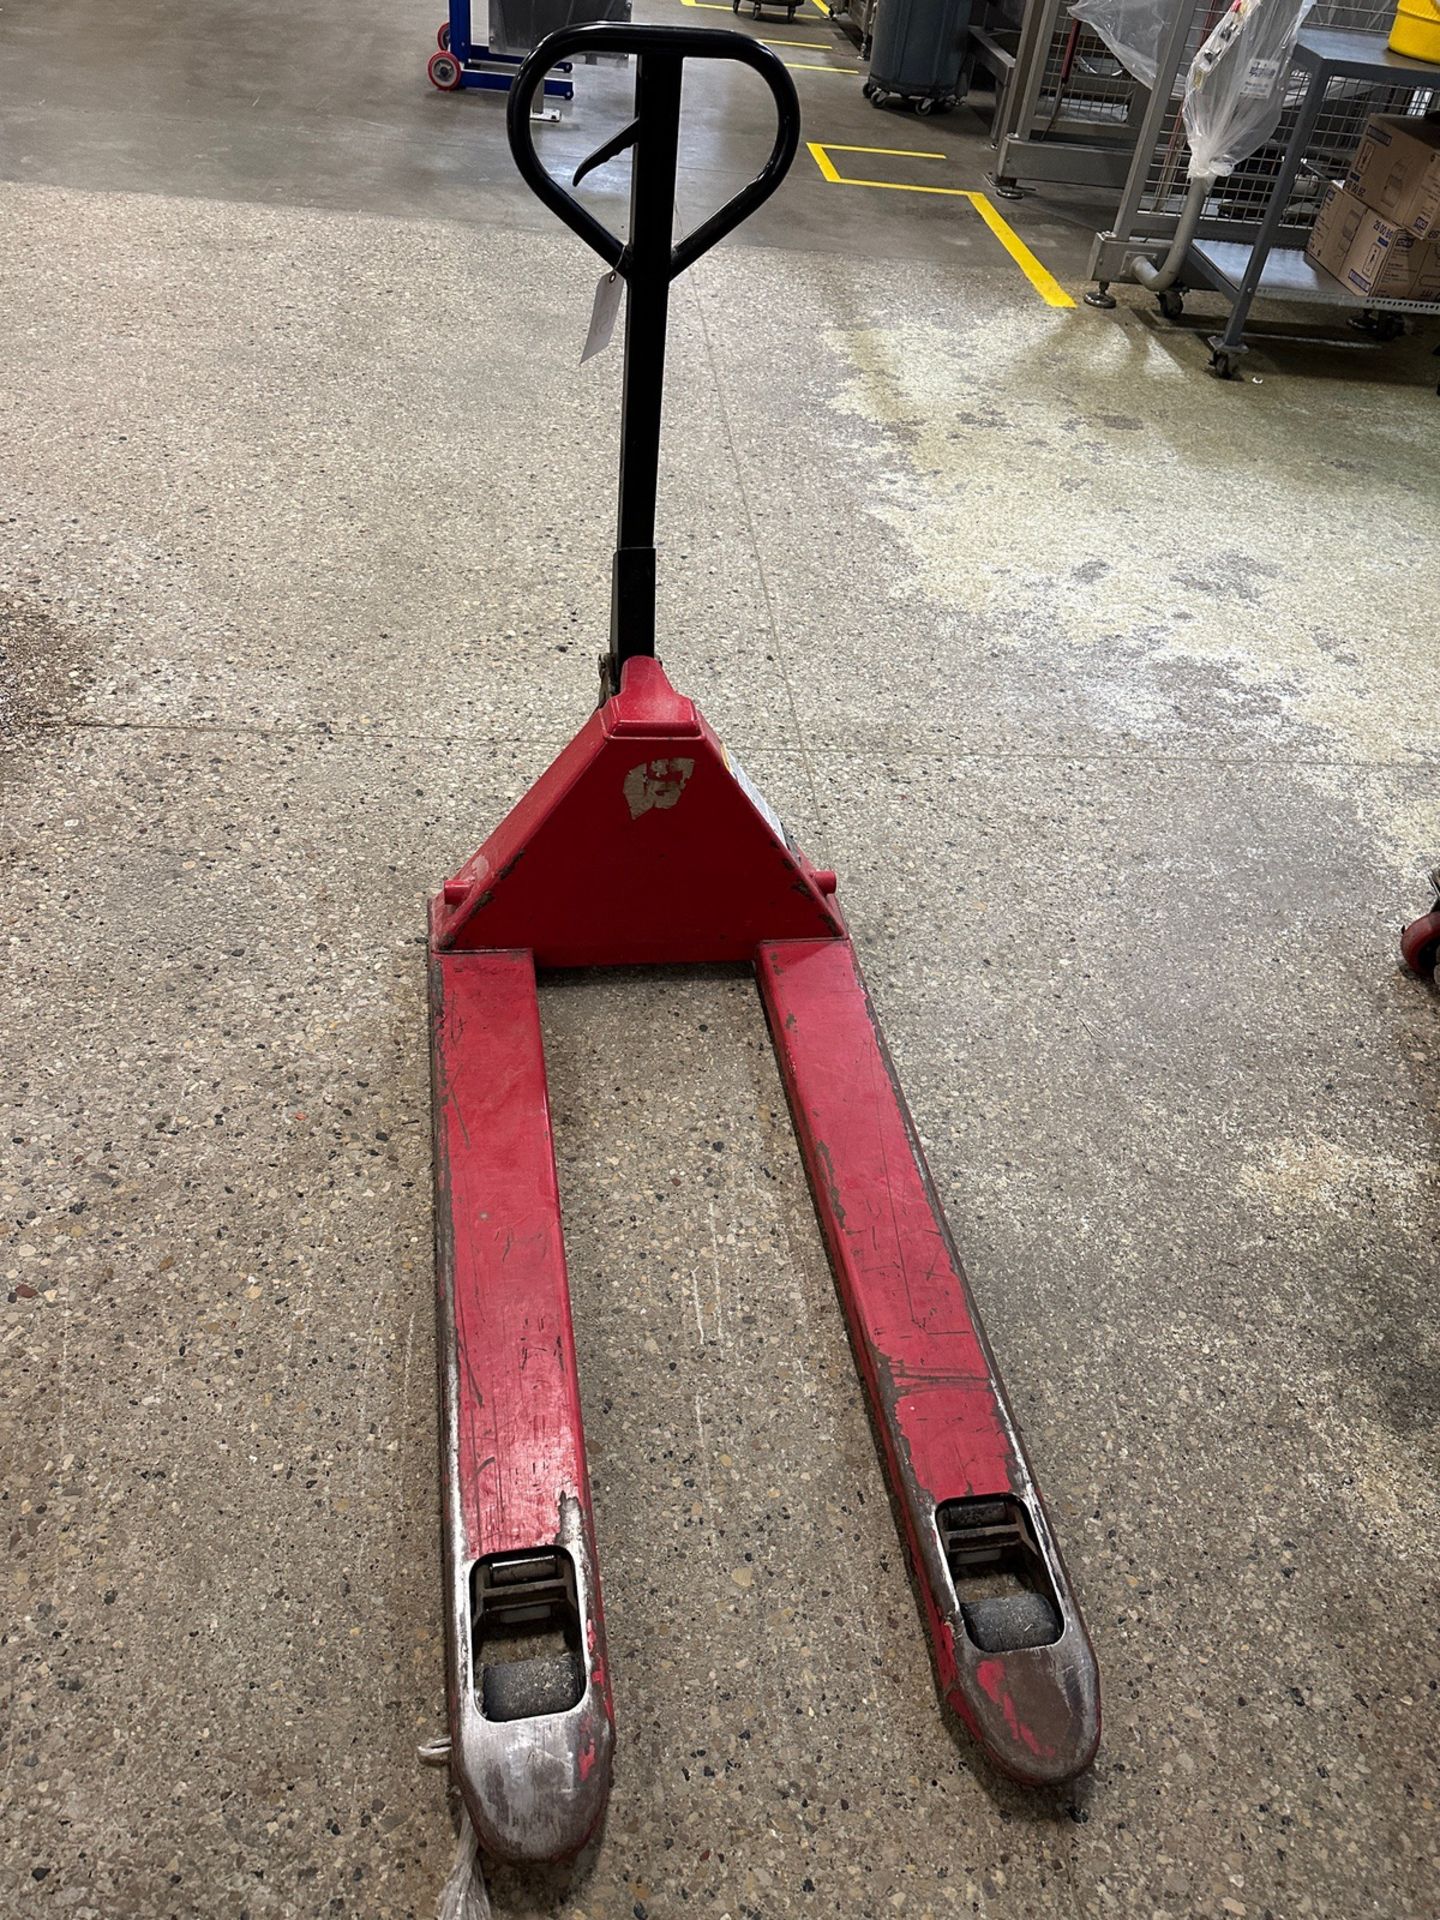 5500 LB Capacity Pallet Truck | Rig Fee $25 - Image 2 of 4